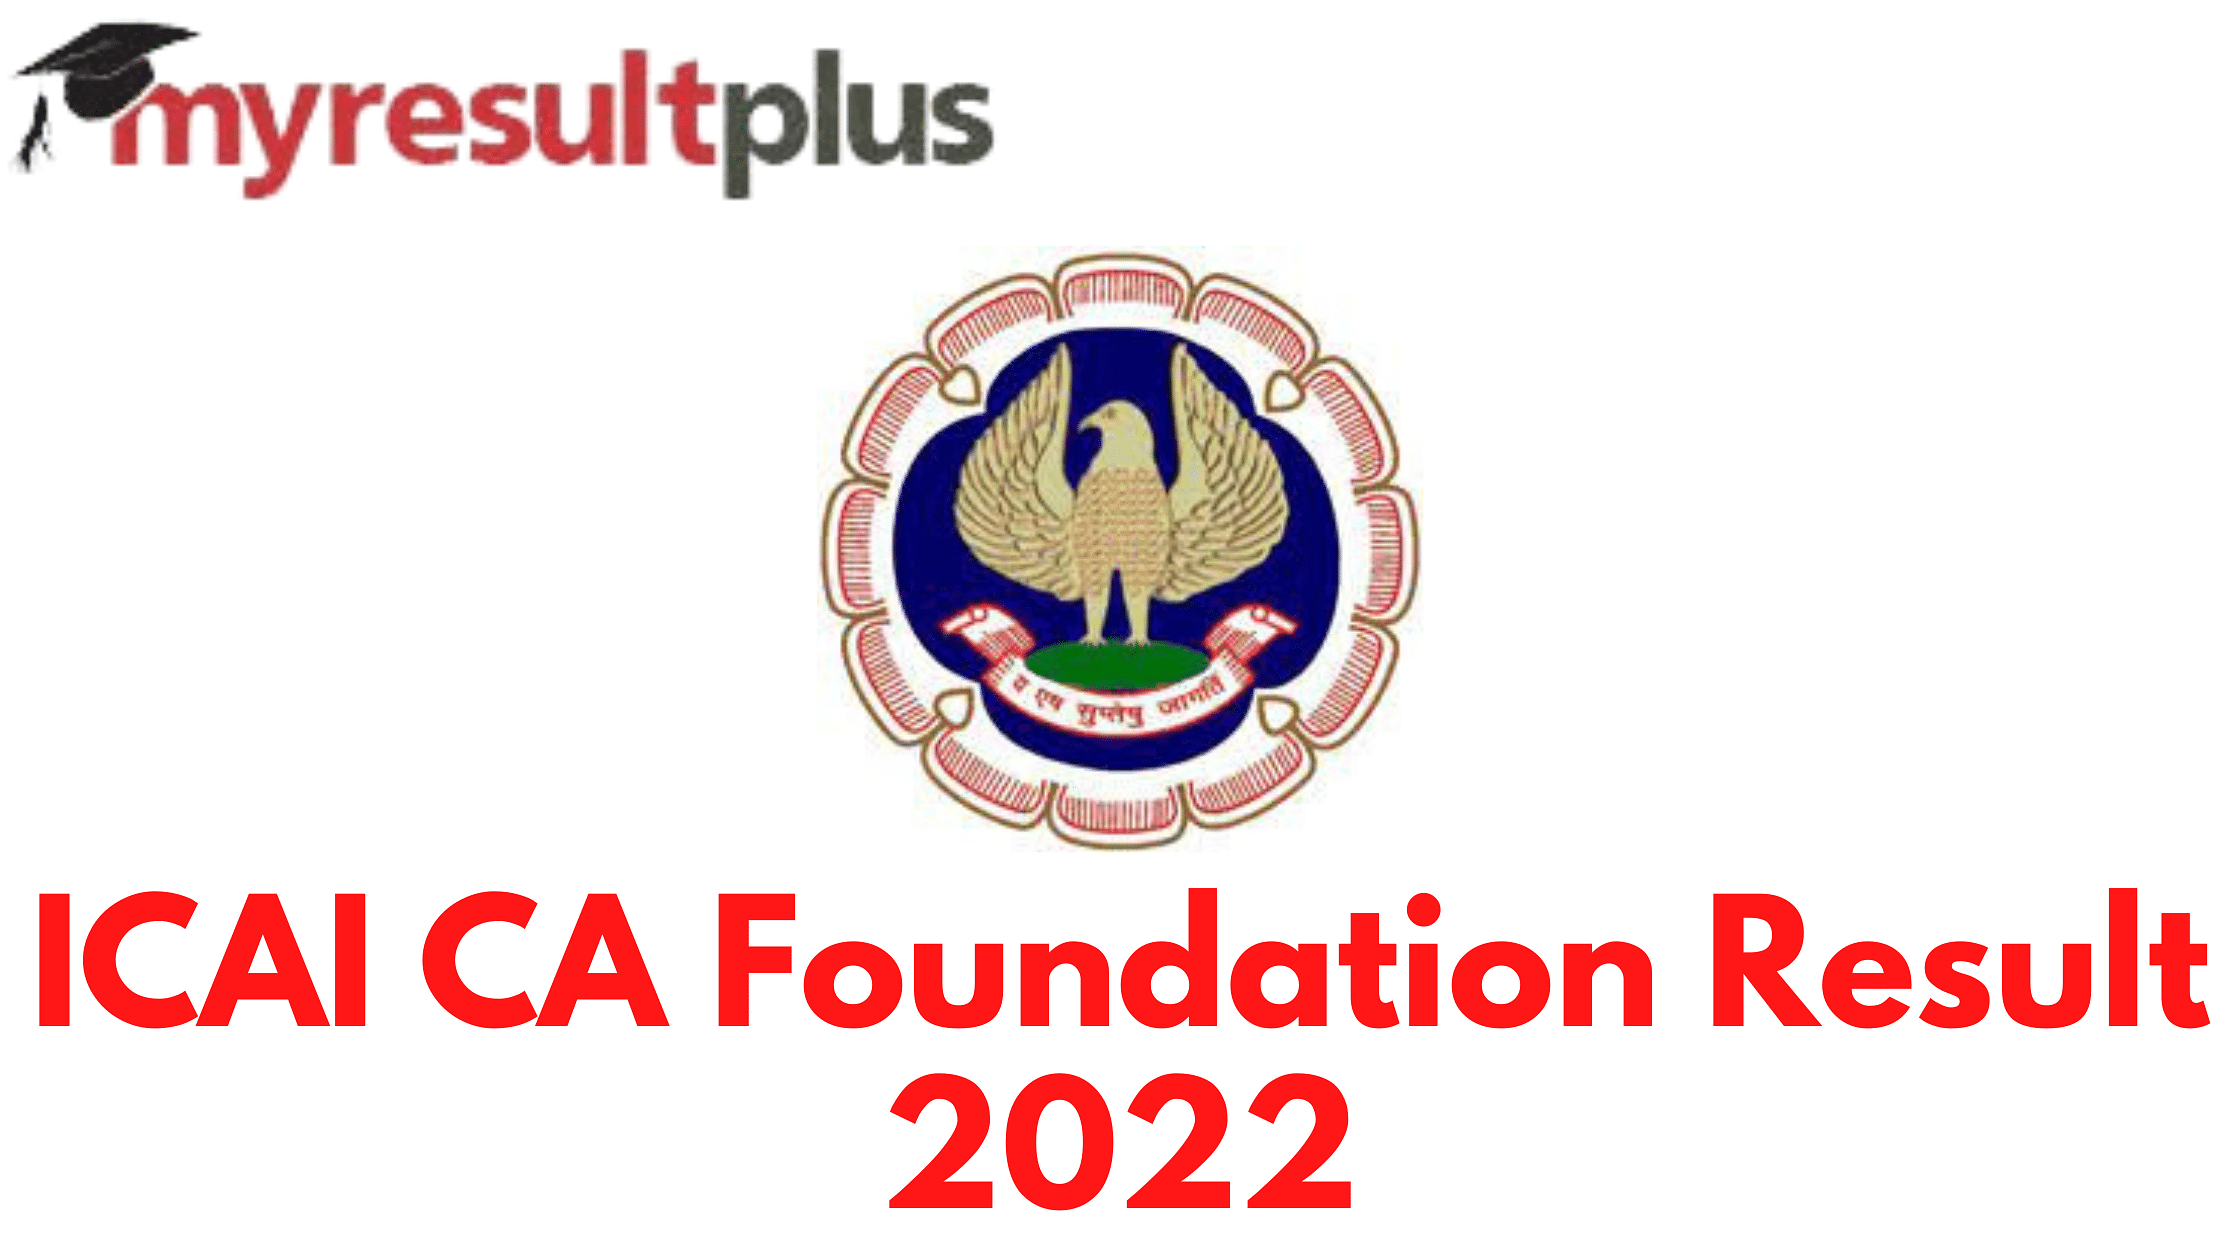 ICAI CA Foundation Result 2022 Announced, Direct Link to Download Scorecard Here